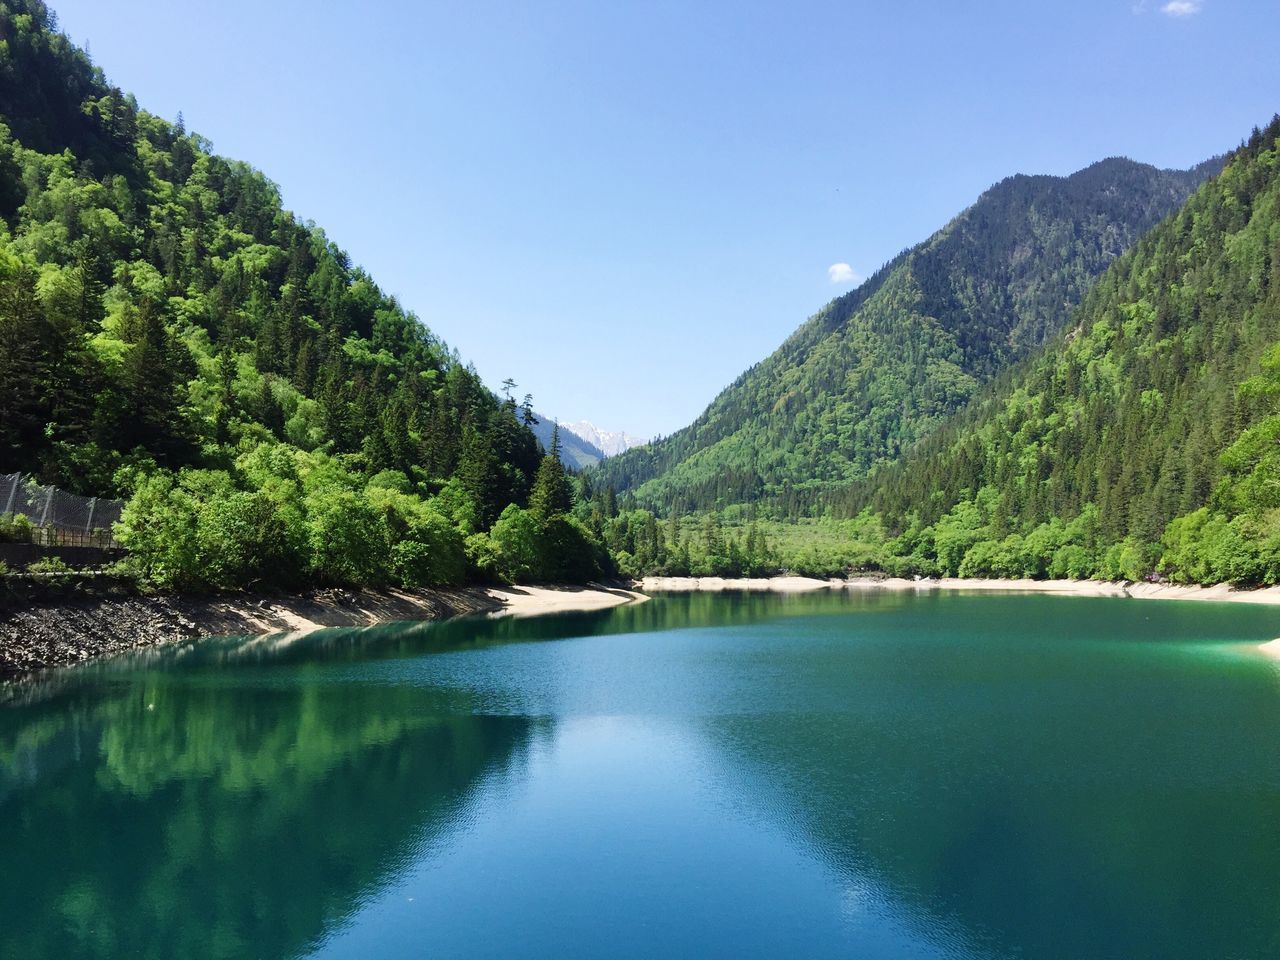 water, beauty in nature, tranquil scene, nature, tranquility, scenics, mountain, lake, waterfront, tree, outdoors, idyllic, no people, day, clear sky, reflection, blue, green color, sky